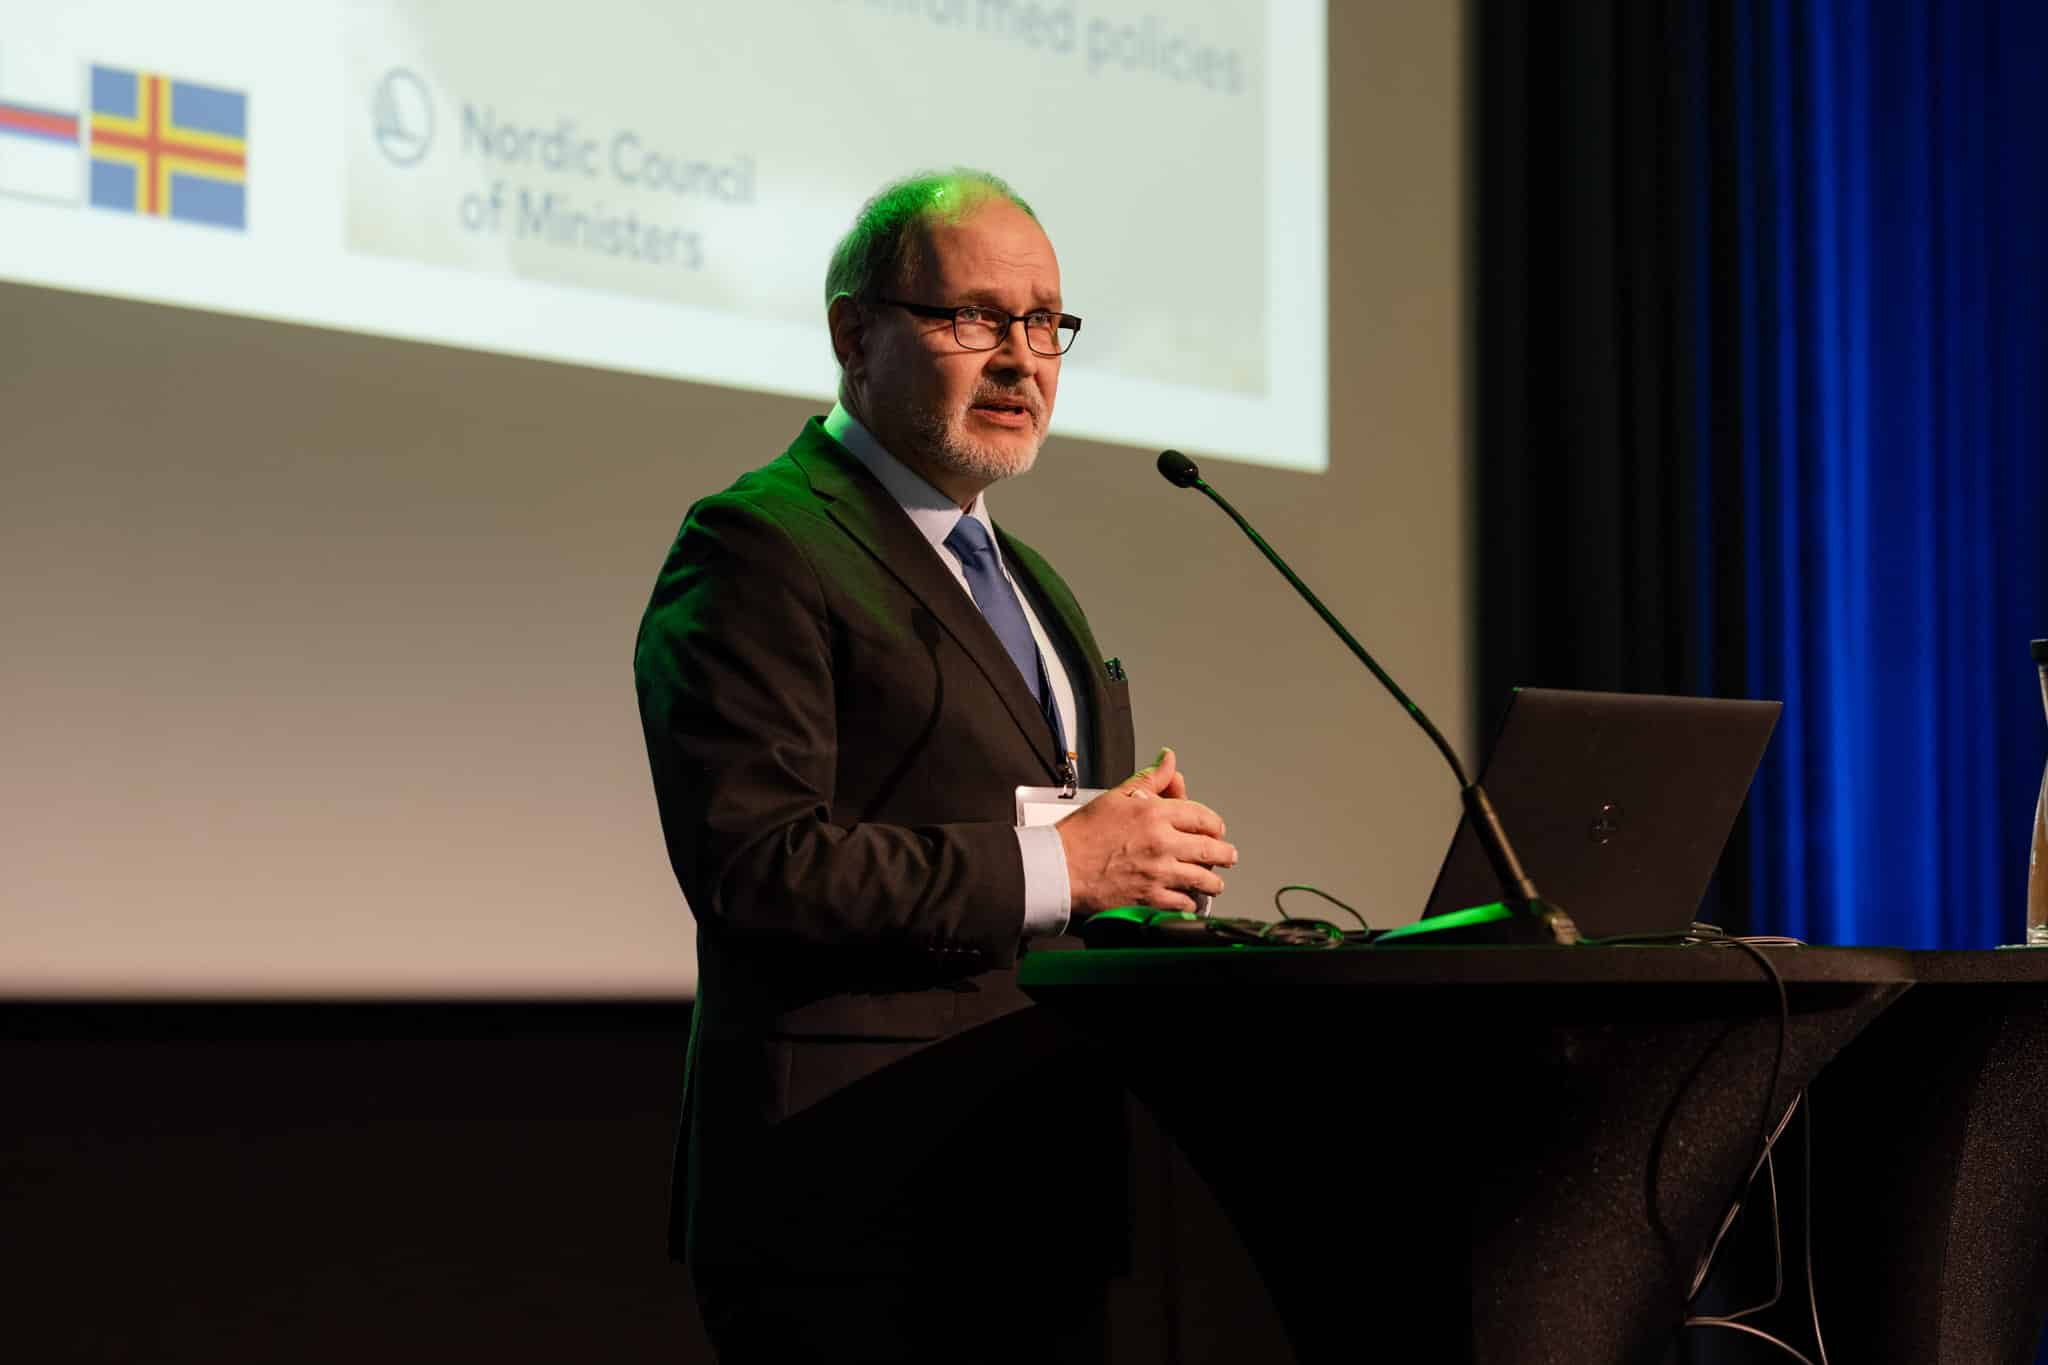 Professor Jarmo Reponen, President of the Nordic Conference on Digital Health and Wireless Solutions